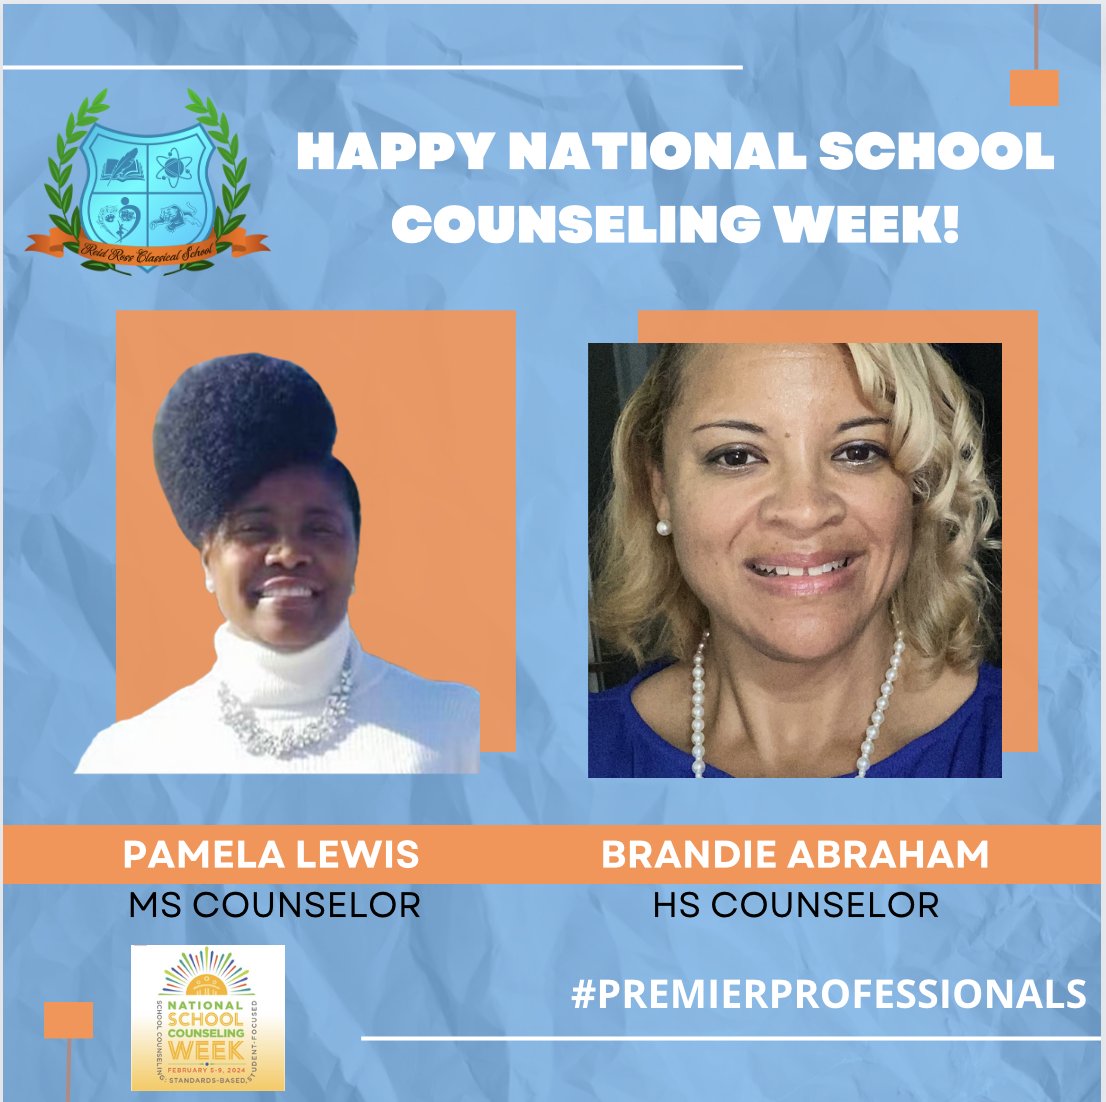 Thank you, Ms. Lewis and Ms. Abraham! #NSCW #NSCW24